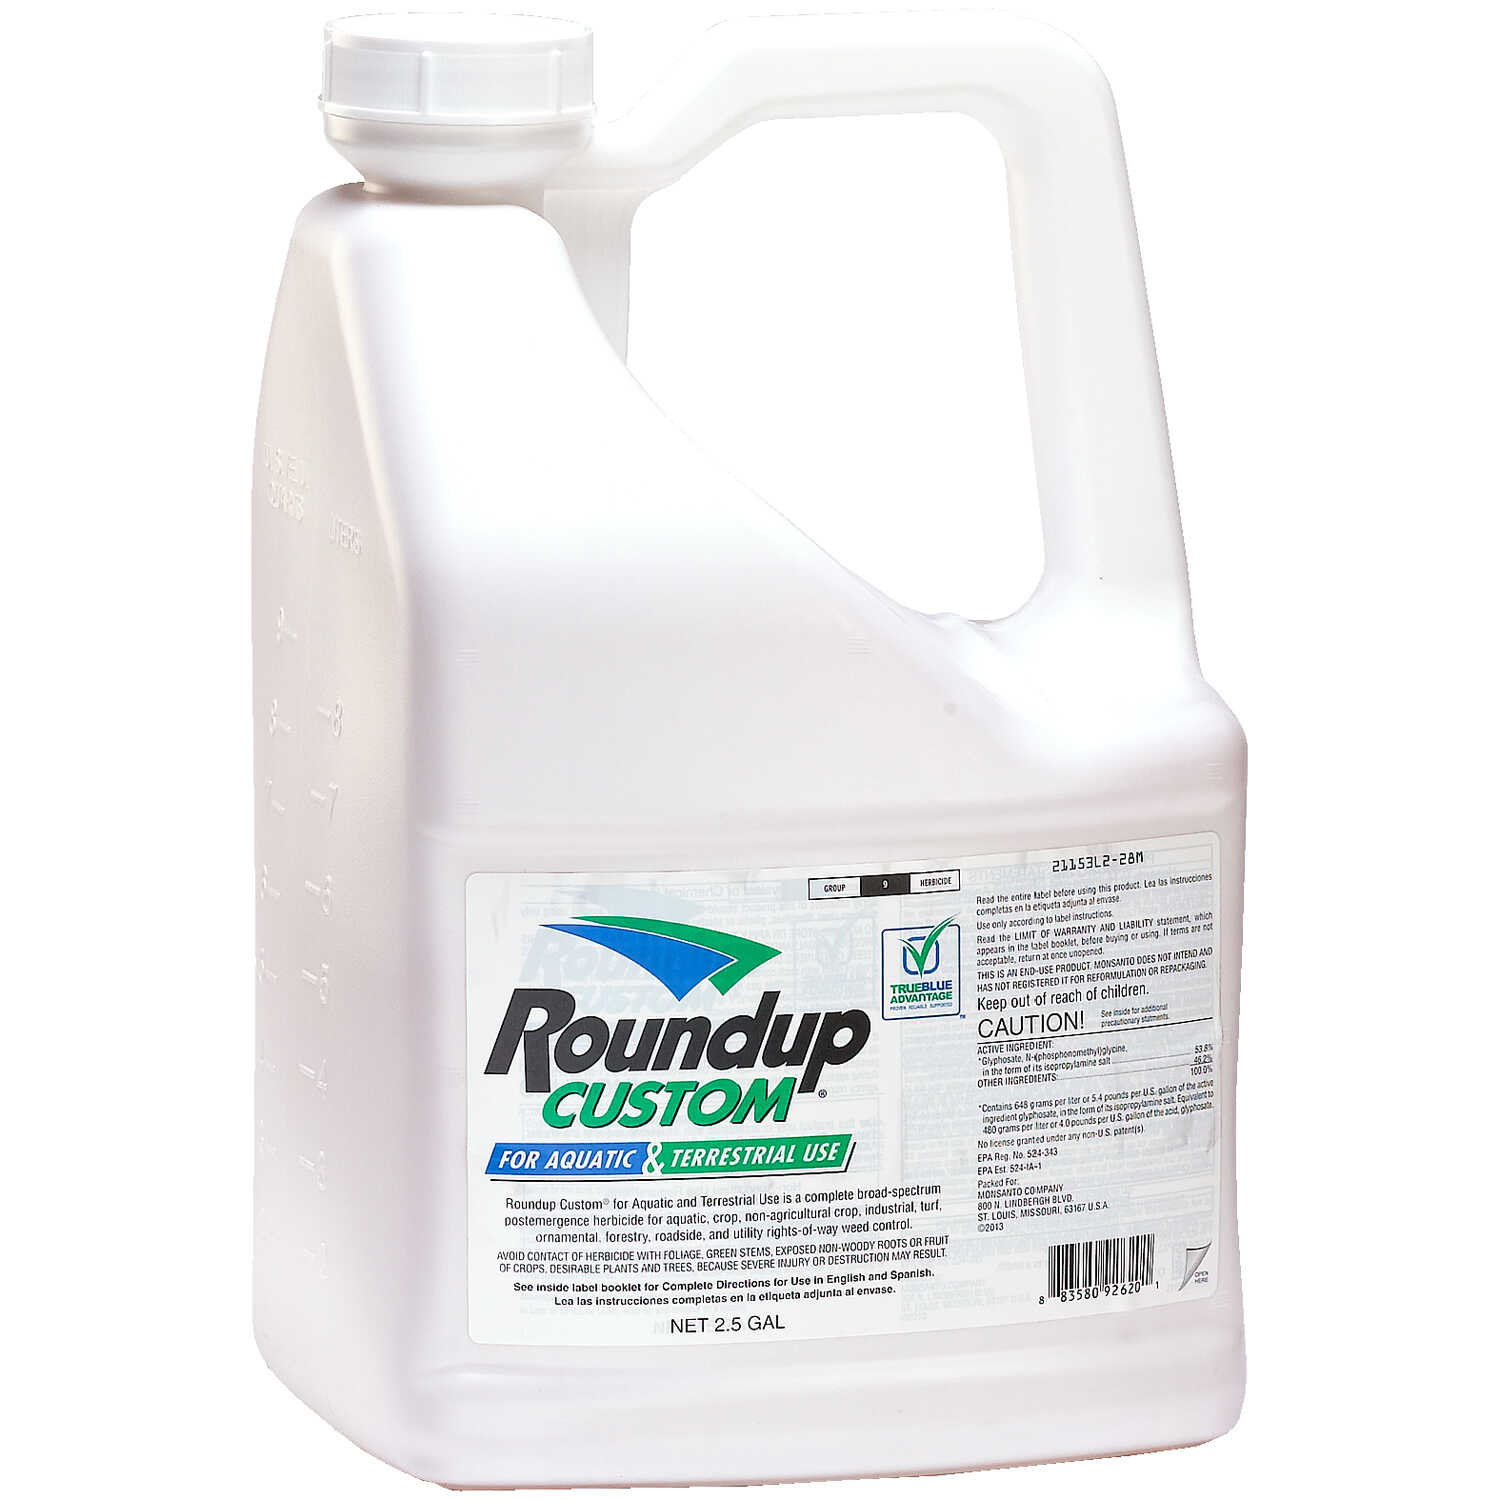 Roundup Custom Herbicide Forestry Suppliers, Inc.